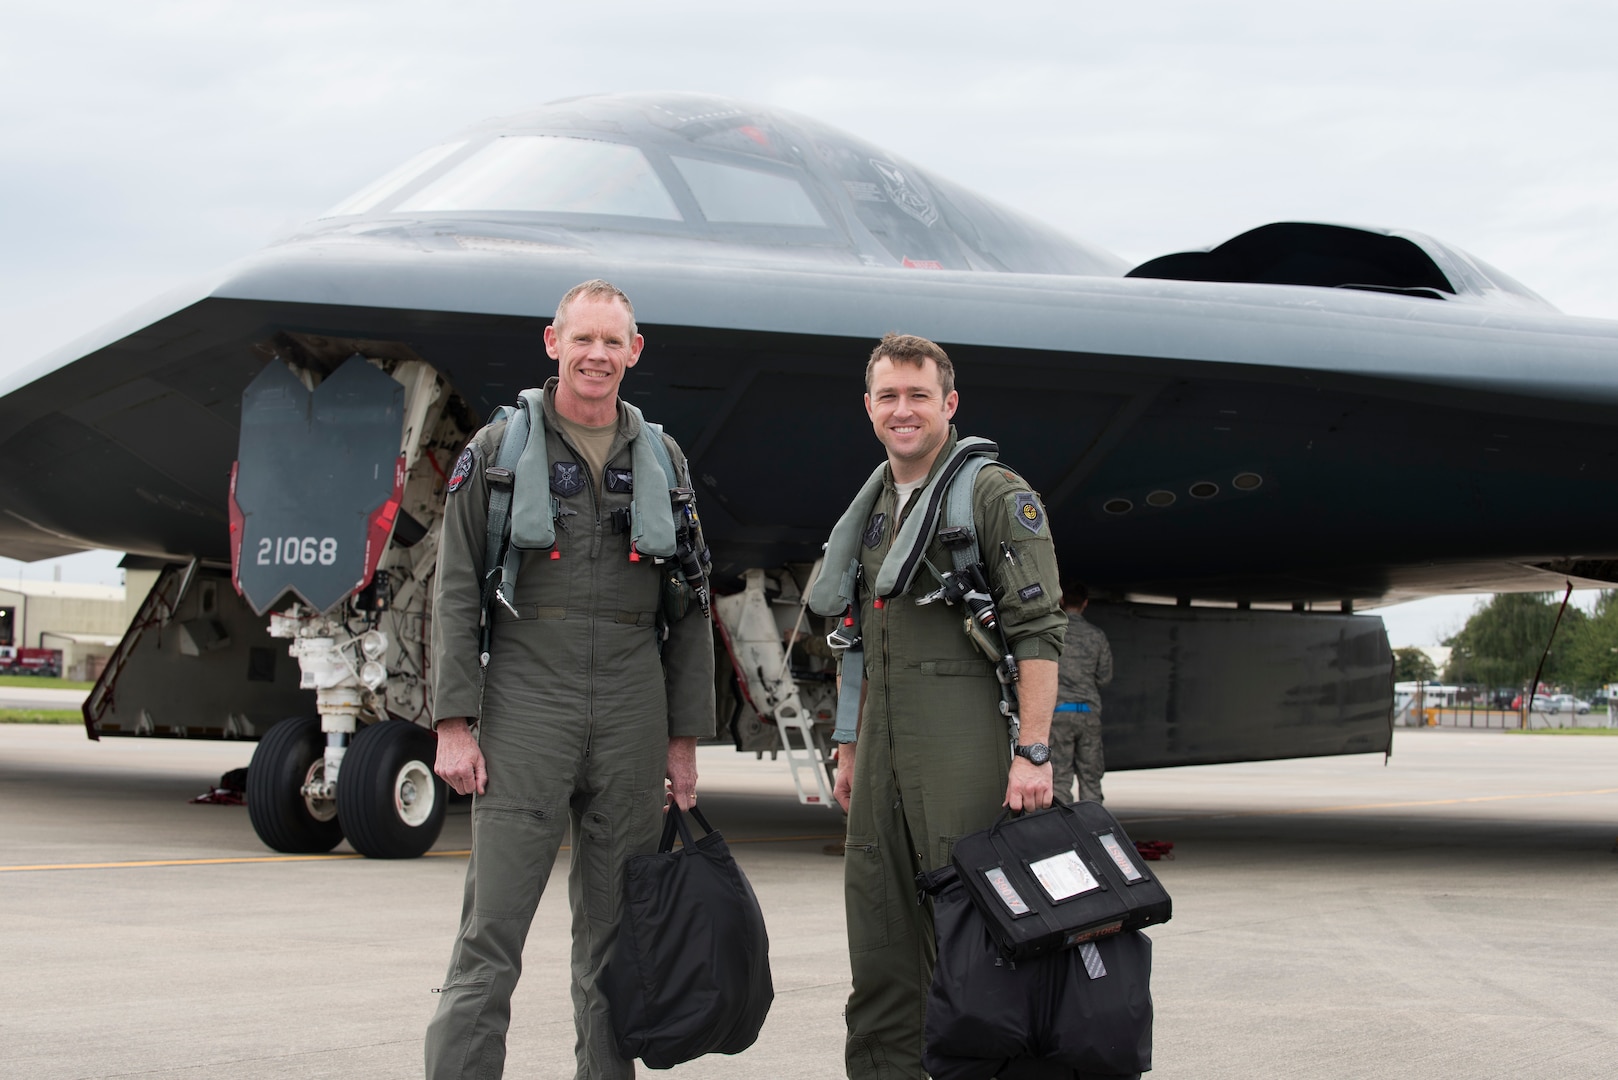 Major General James Dawkins Jr., Eighth Air Force commander, poses for a photo with a pilot call sign Heat, assigned to the 509th Bomb Wing, at Royal Air Force Base Fairford, England, on August 28, 2019. Dawkins flew in a B-2 Spirit during his visit to engage with members of Whiteman Air Force Base, Missouri, who had deployed to Royal Air Force Fairford as a Bomber Task Force to conduct theater integration and flying training. (U.S. Air Force photo by Staff Sgt. Kayla White)